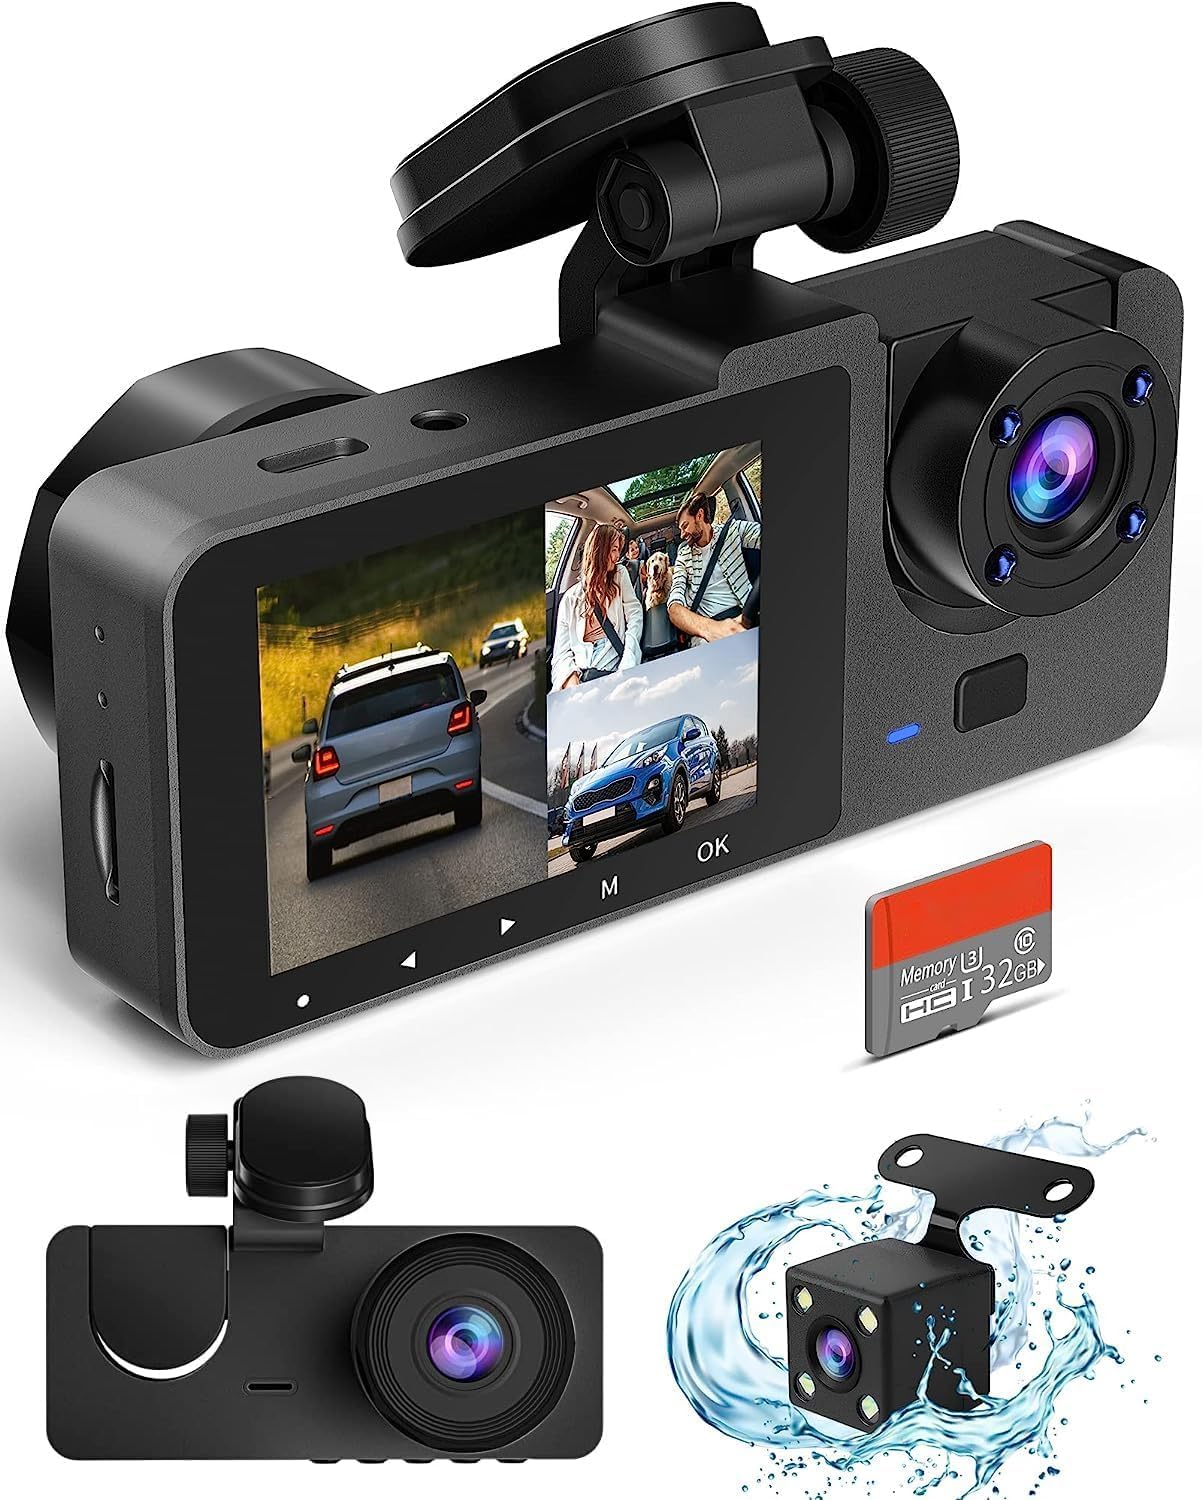 Azacvb Dash Camera for Cars,4K Full UHD Car Camera Front Rear with Free 32GB SD Card,Built-in Super Night Vision,2.0'' IPS Screen,170°Wide Angle,WDR, 24H Parking Mode, Loop Recording